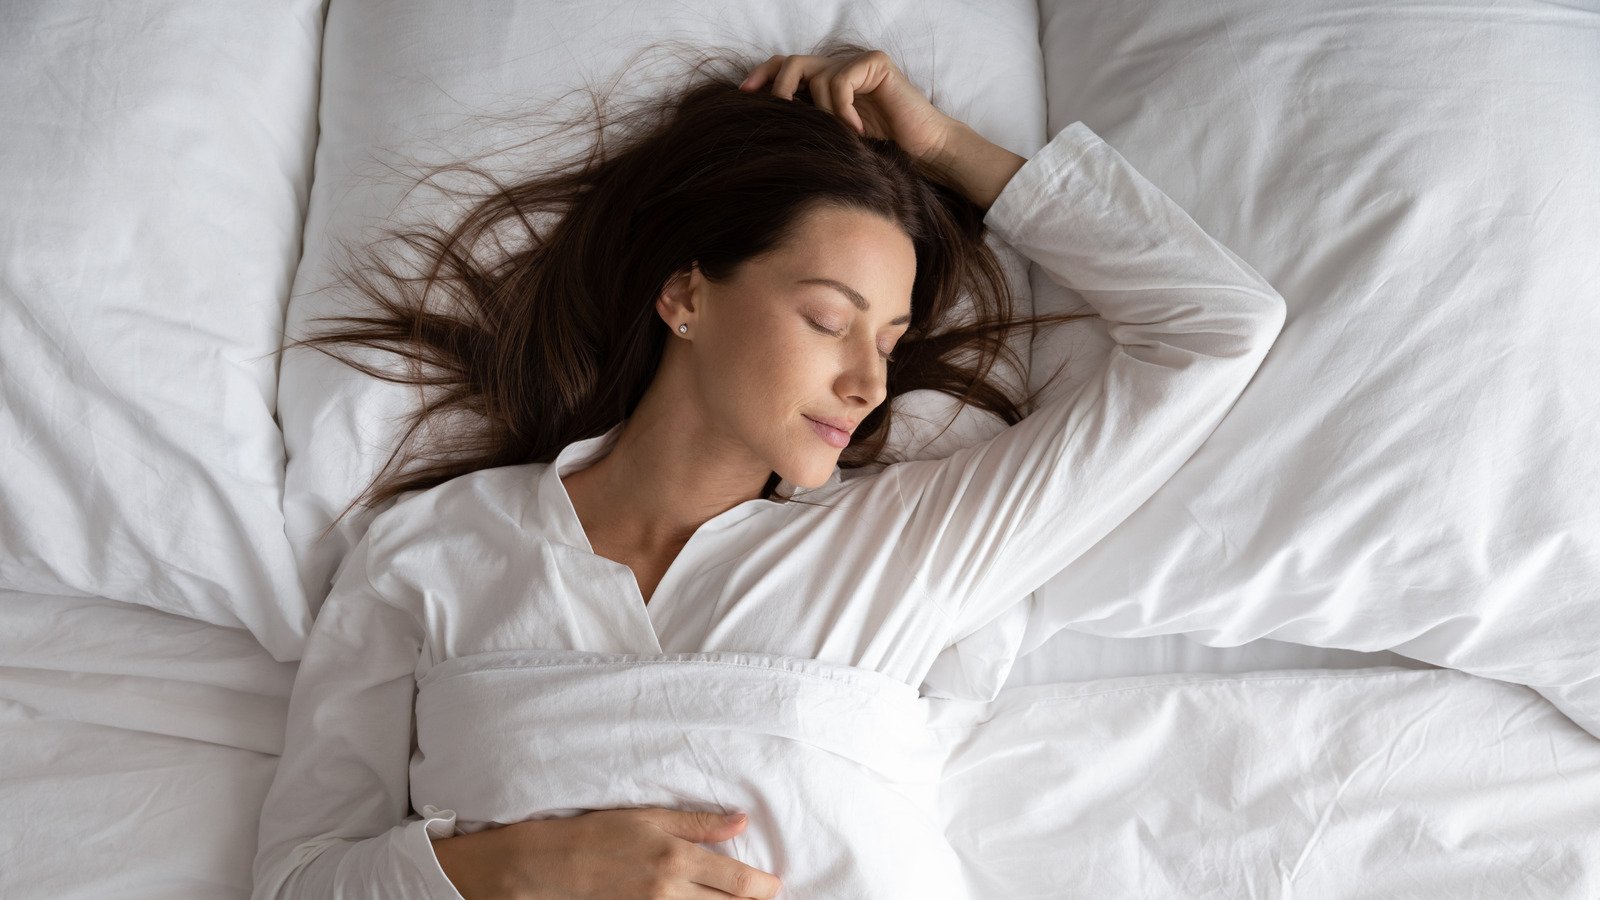 The One Thing You Shouldn't Do With Your Pillow When You Sleep - Health Digest